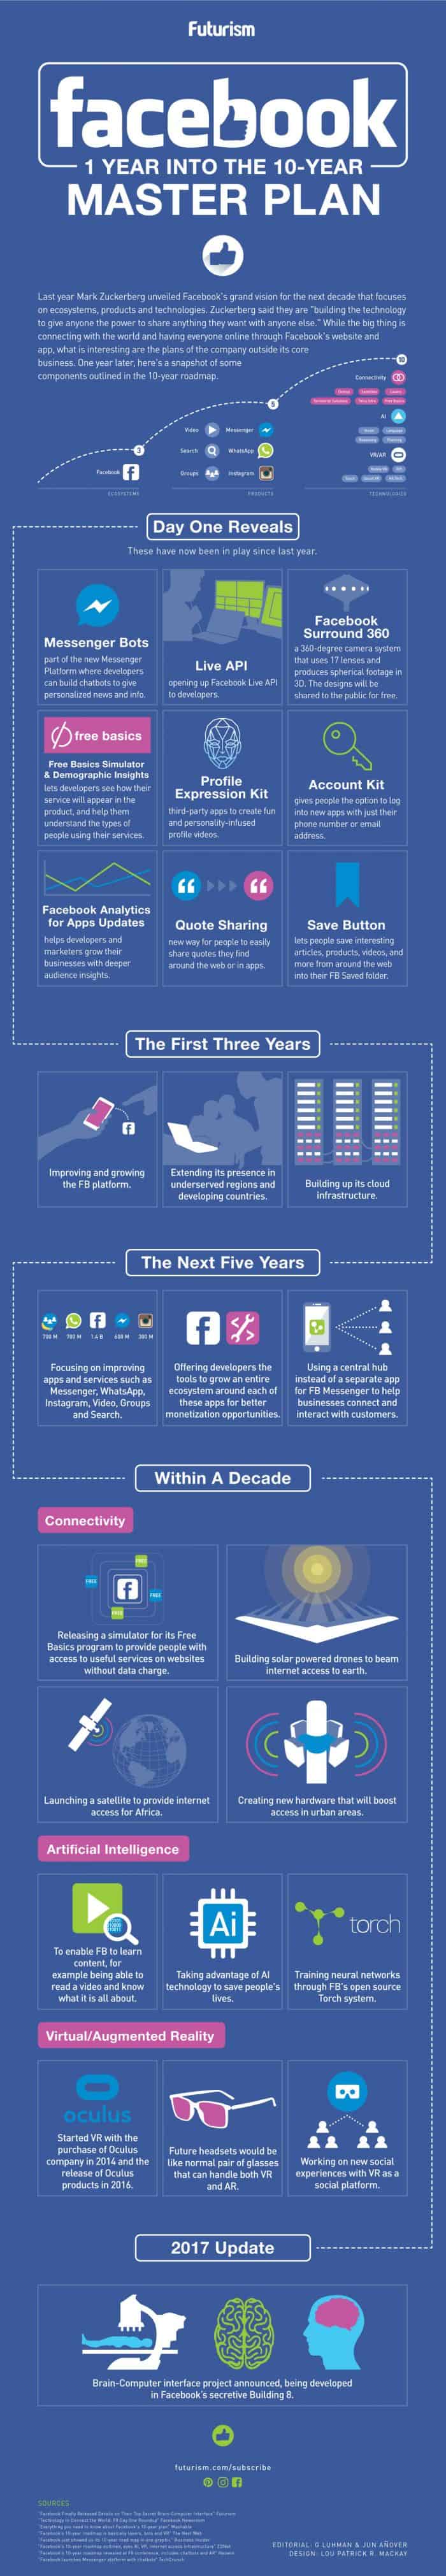 Infogrpahic about Facebook`s 10 year master plan and how far they have come